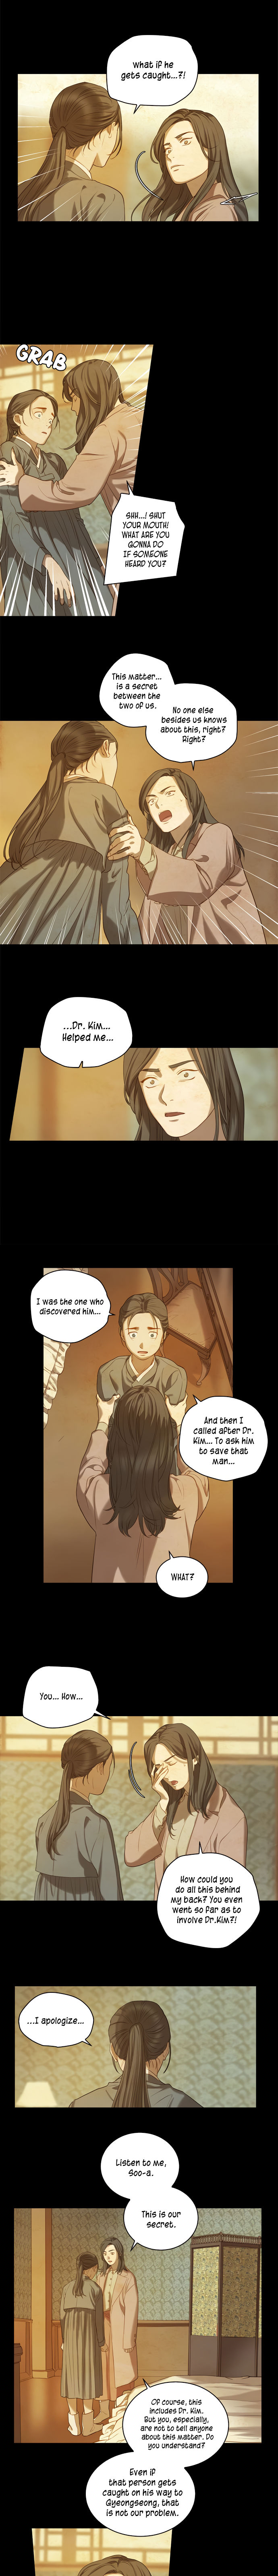 Gorae Byul - The Gyeongseong Mermaid - Chapter 6 Page 5